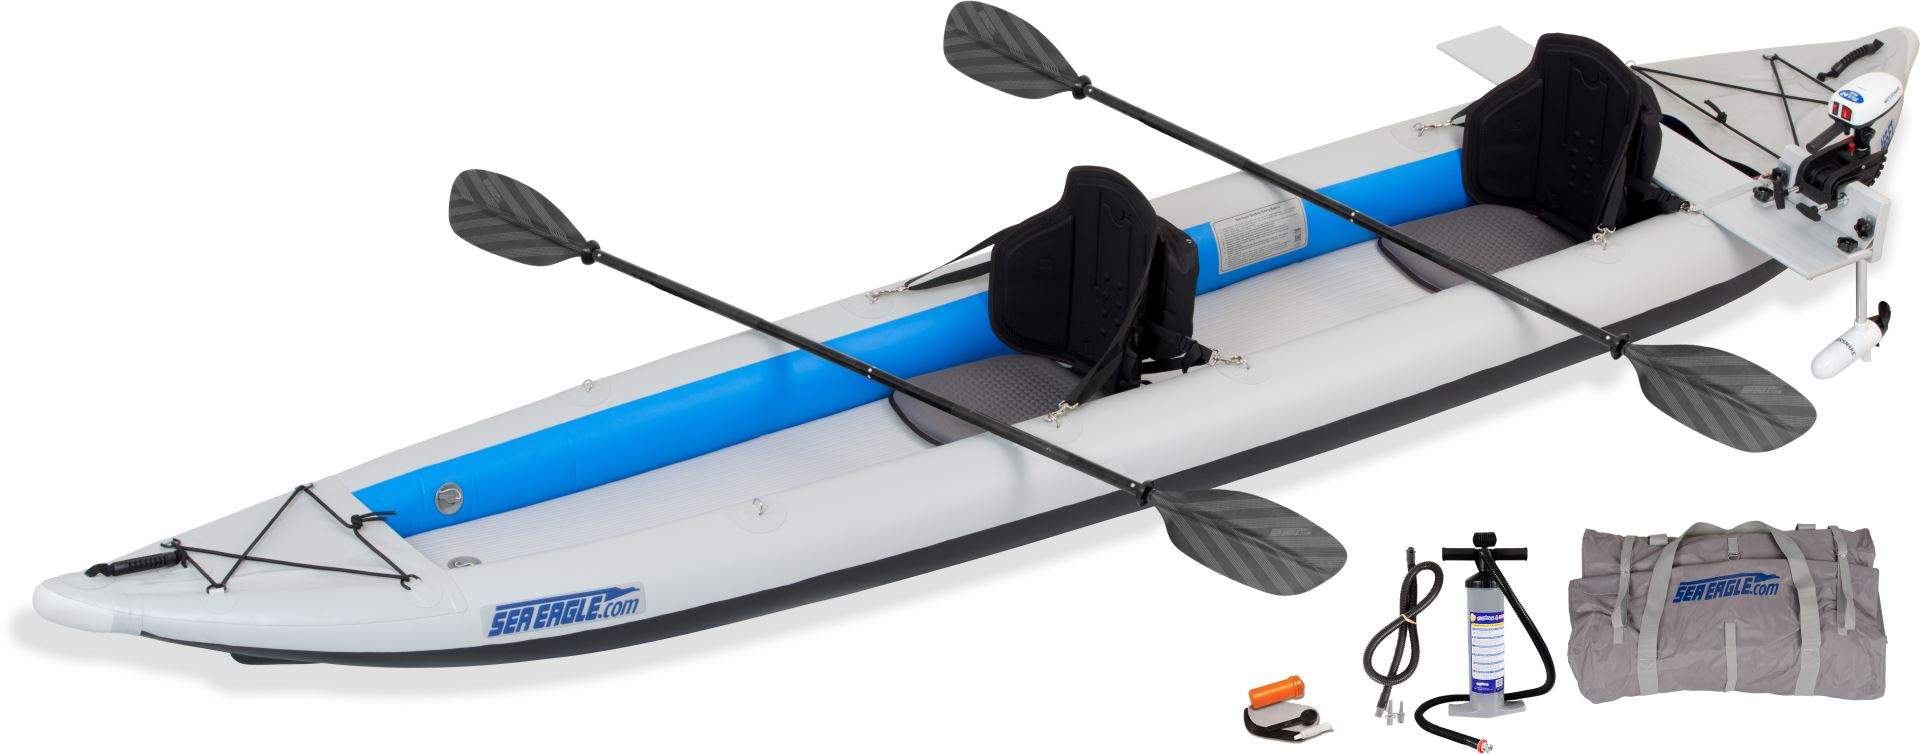 Sea Eagle Inflatable Kayak- 465ft Fast Track 2 Person